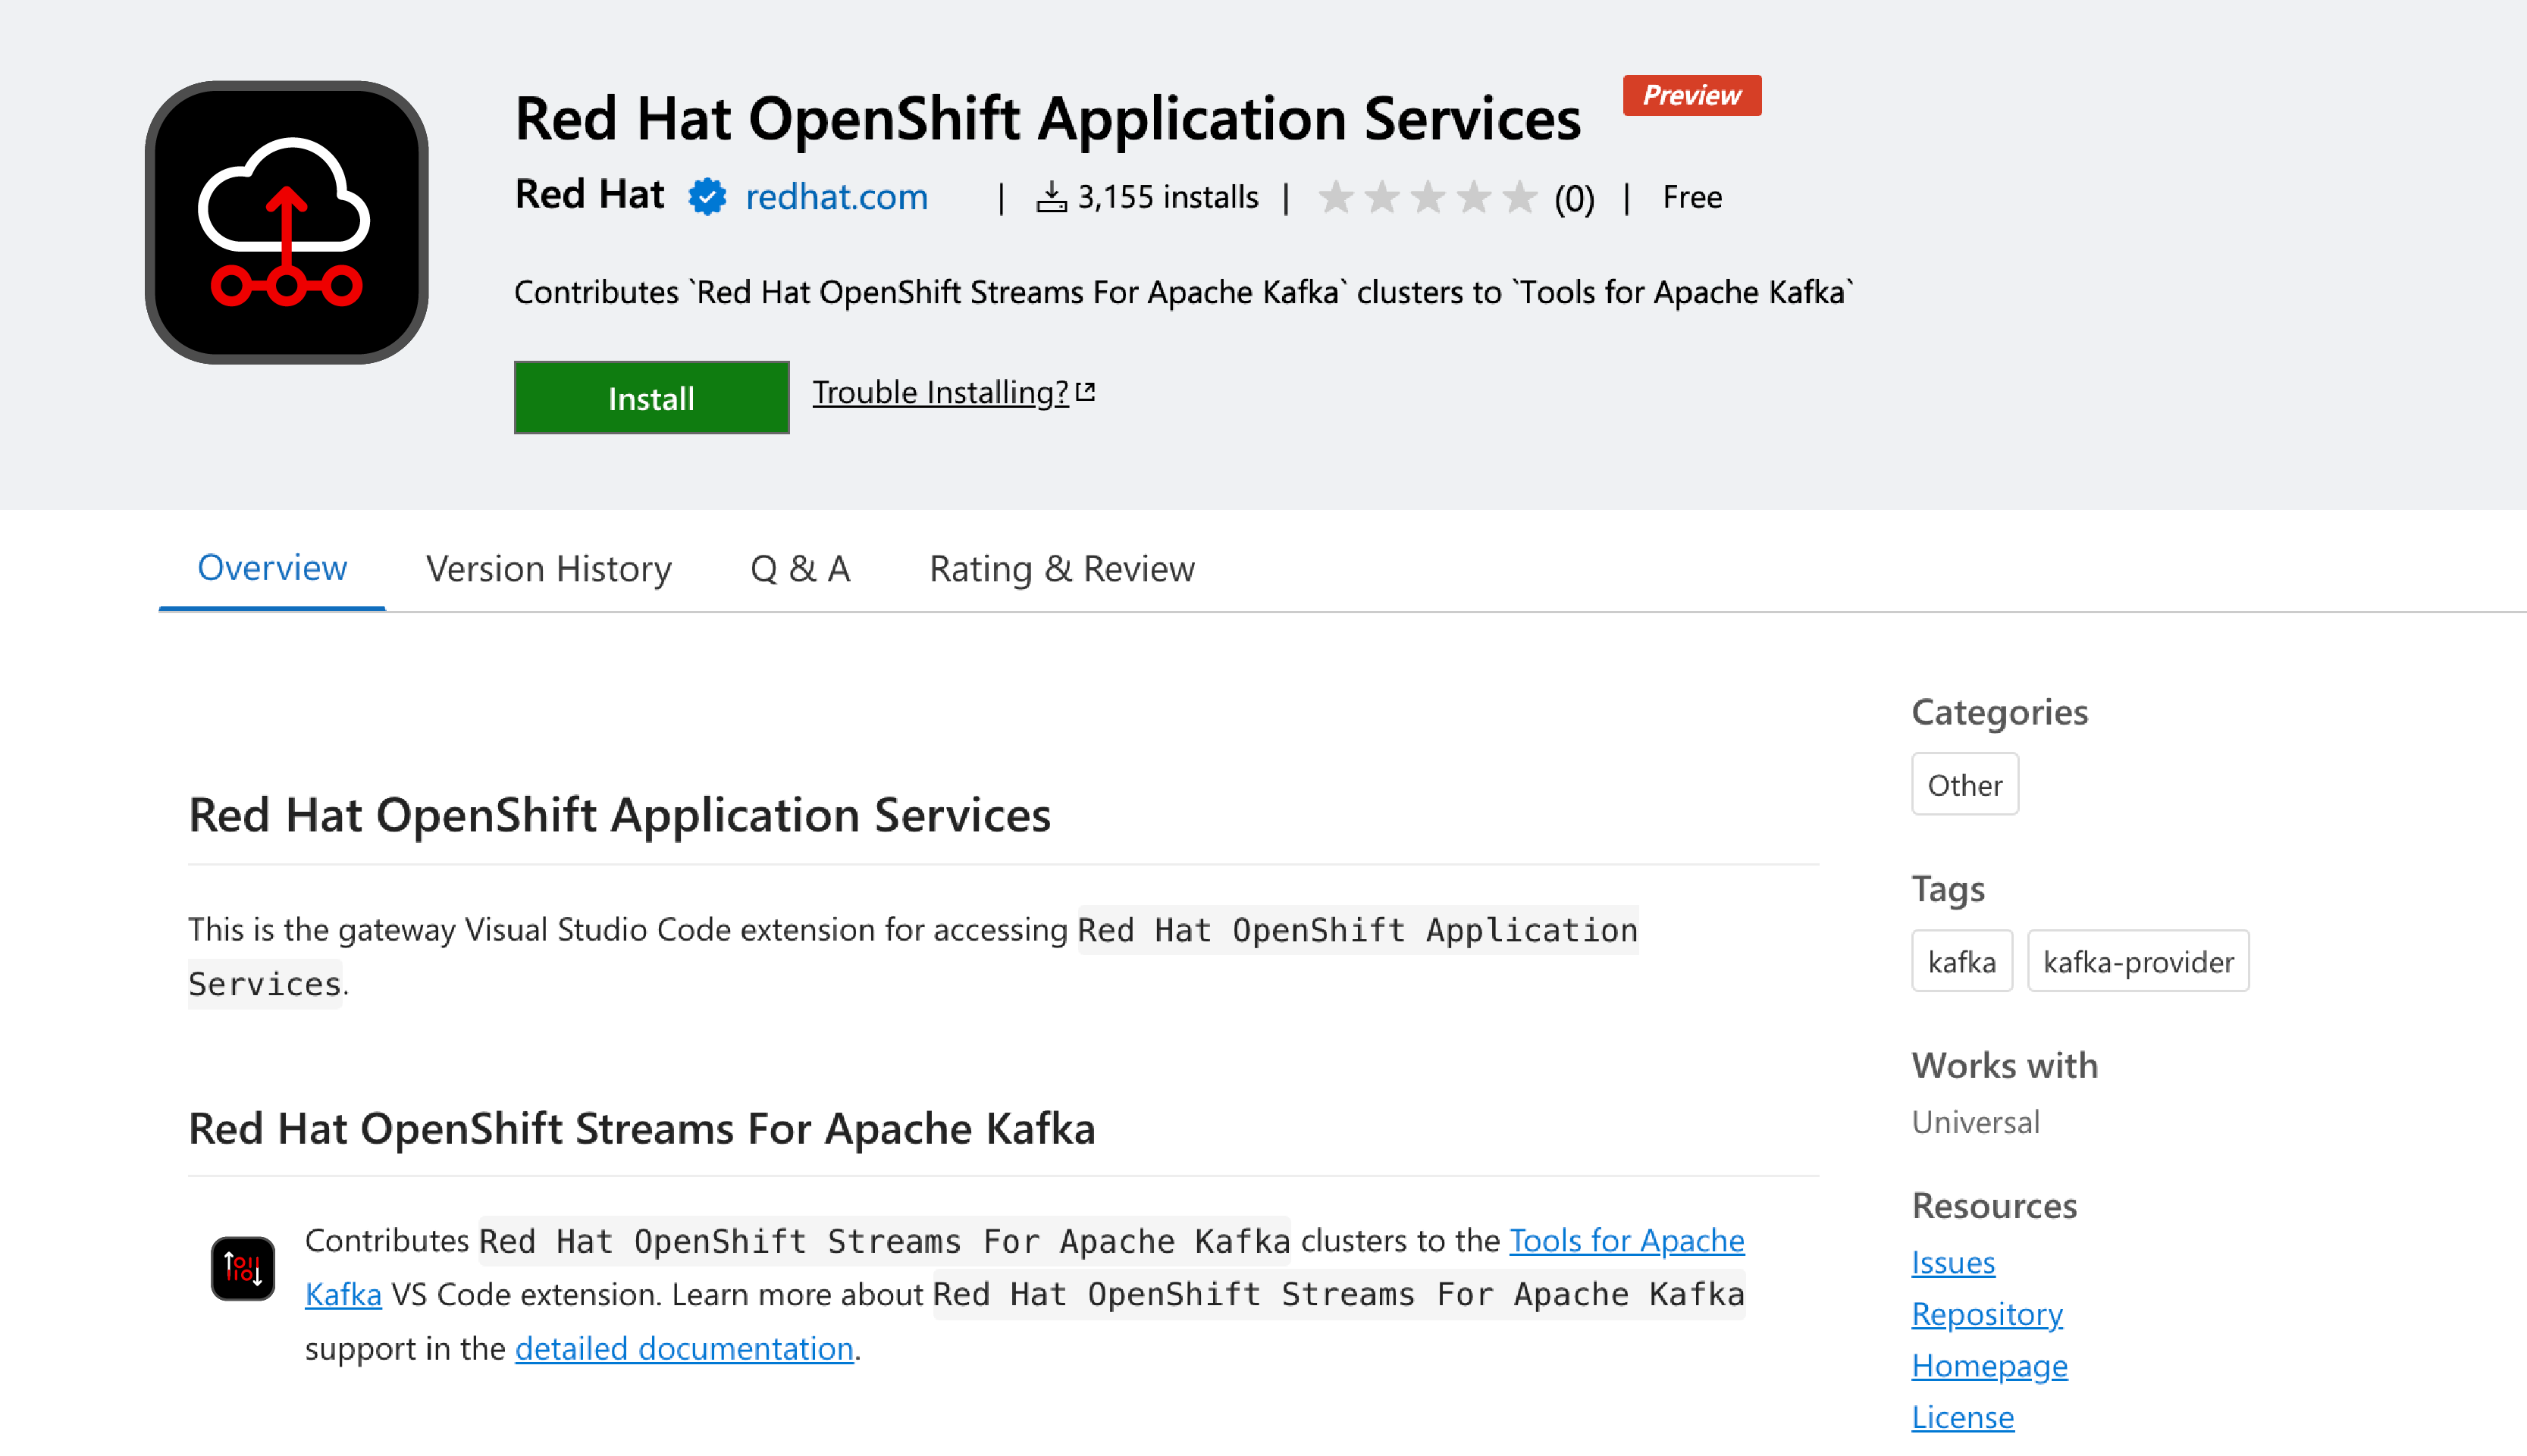 Microsoft Visual Studio marketplace page for Red Hat OpenShift Application Services.